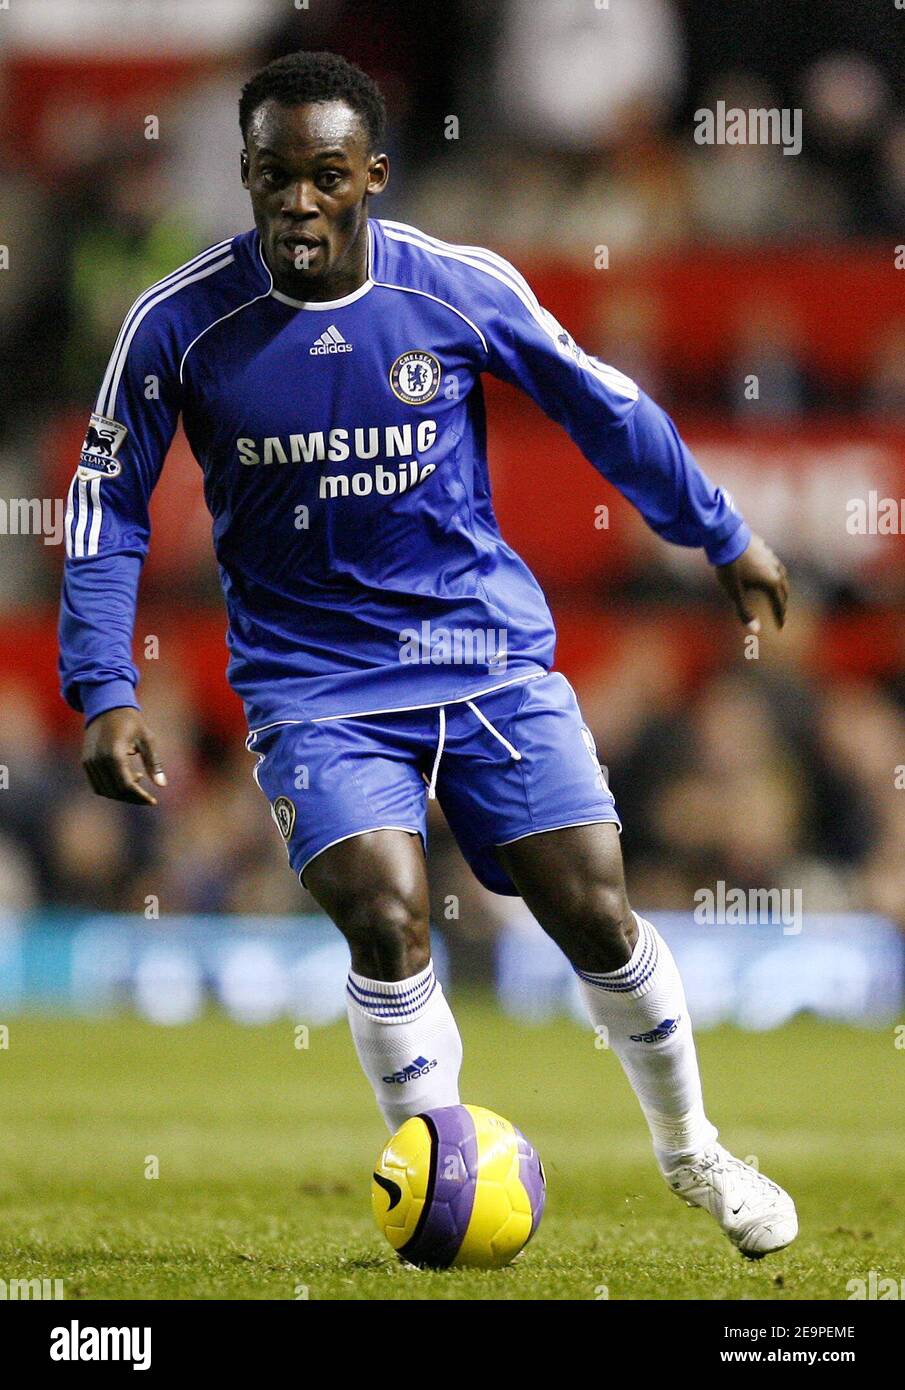 Chelsea's Michael Essien in action during the FA Barclays Premiership, Manchester United vs Chelsea at the Old Trafford stadium in Manchester, UK on November 26, 2006. The match ended in a 1-1 draw. Photo by Christian Liewig/ABACAPRESS.COM Stock Photo